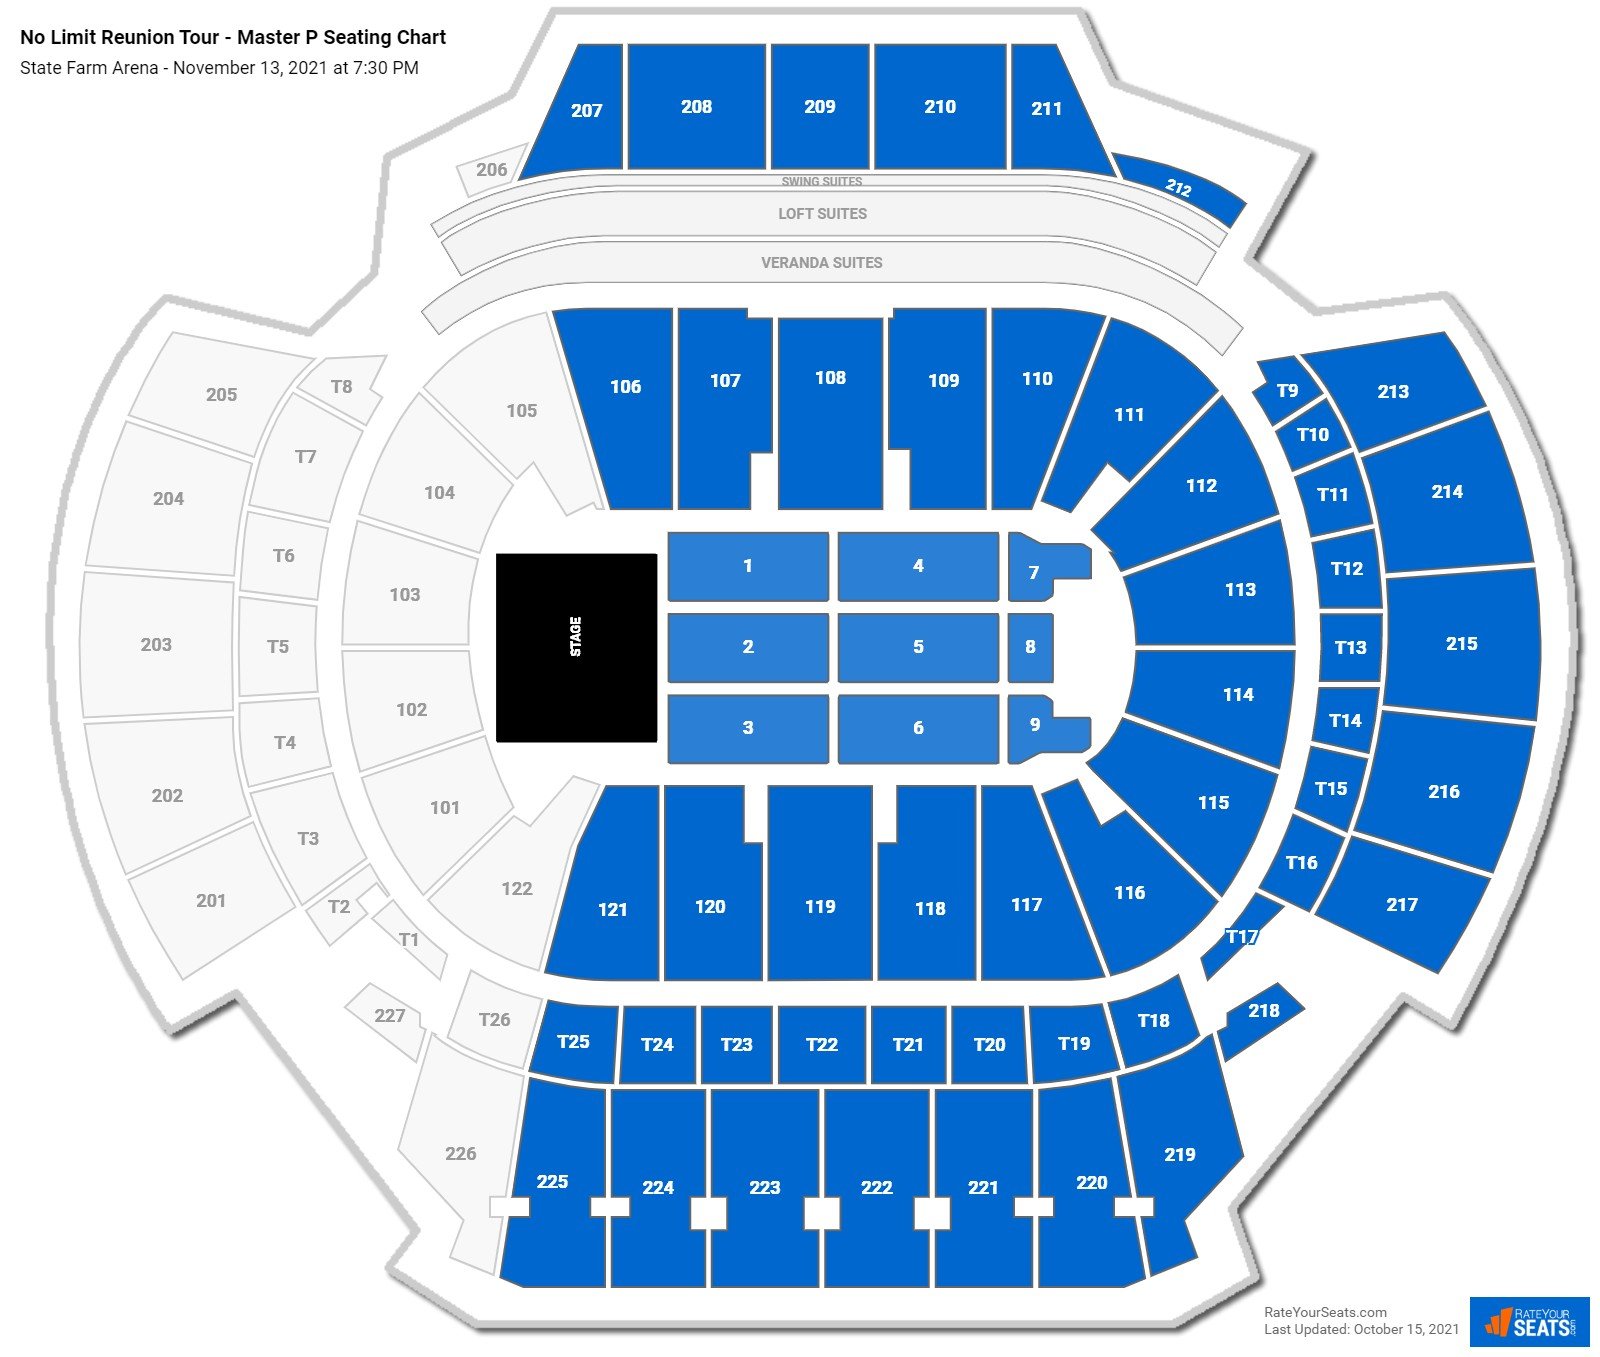 State Farm Arena Seating Charts for Concerts